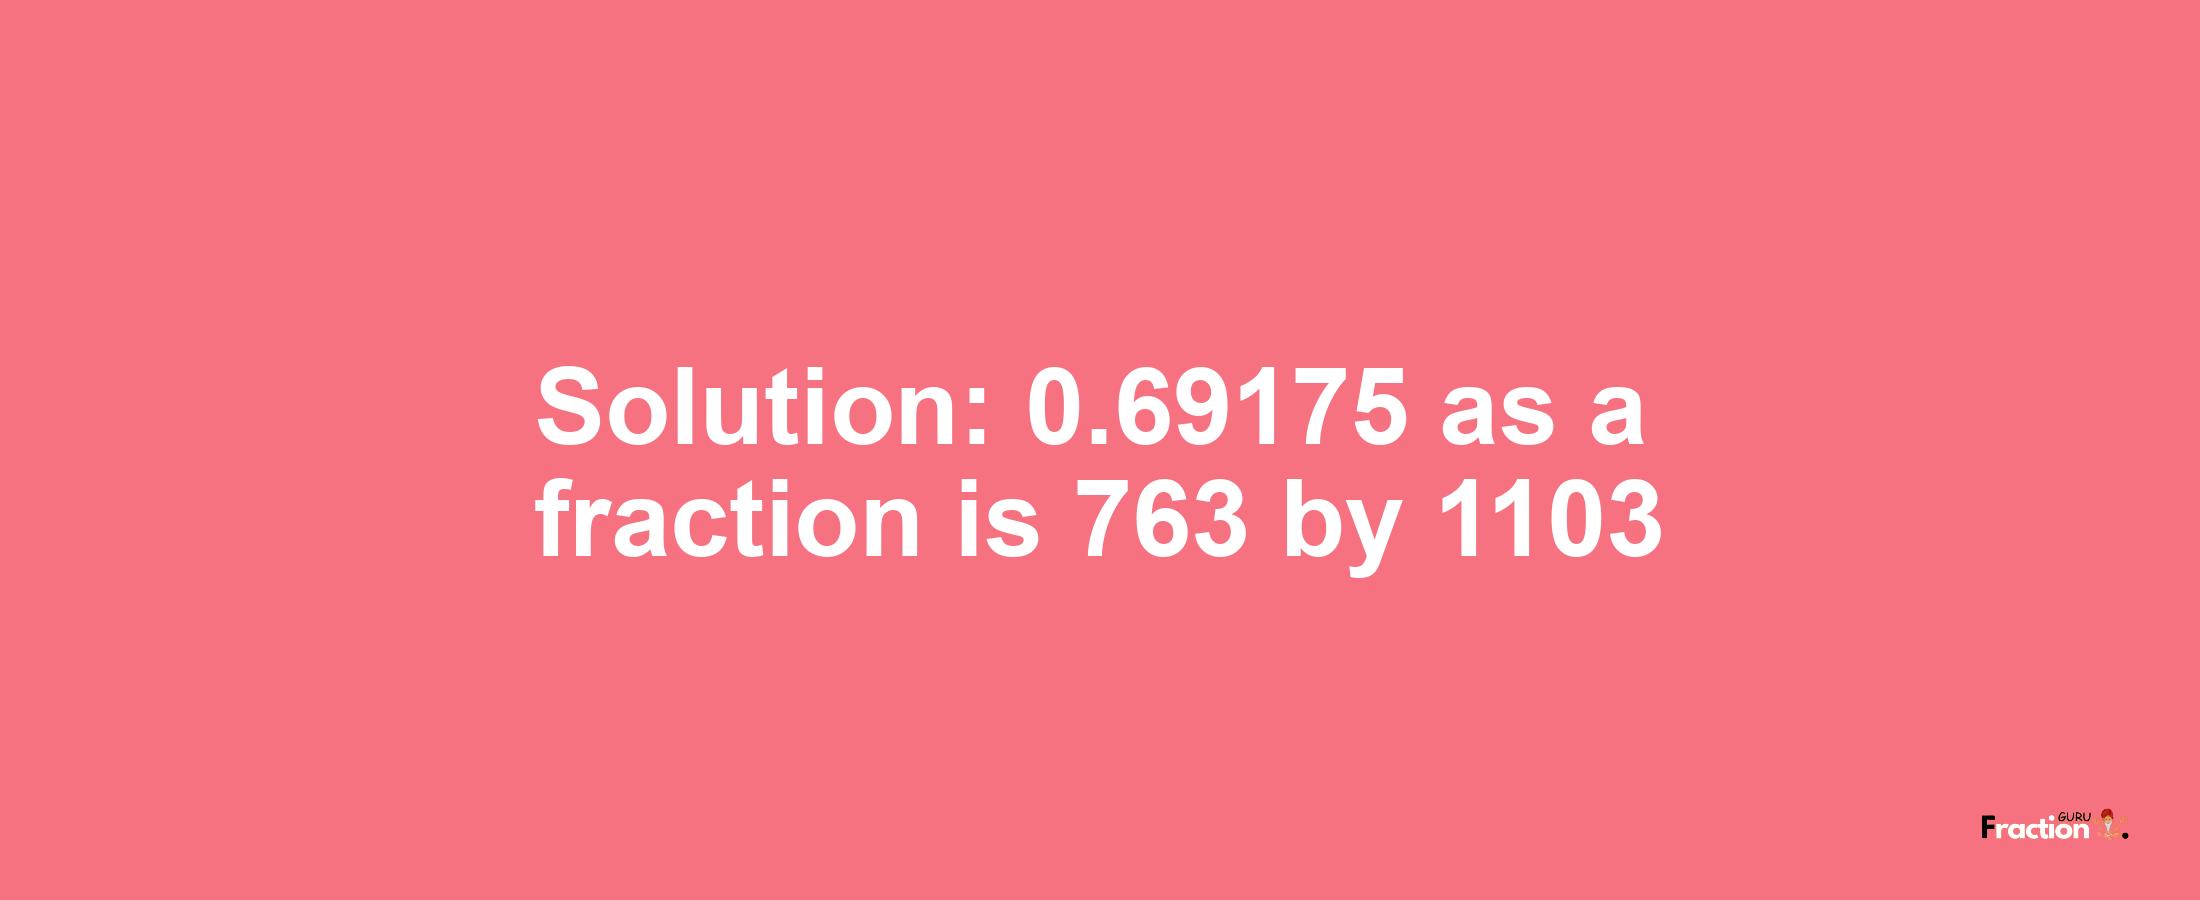 Solution:0.69175 as a fraction is 763/1103